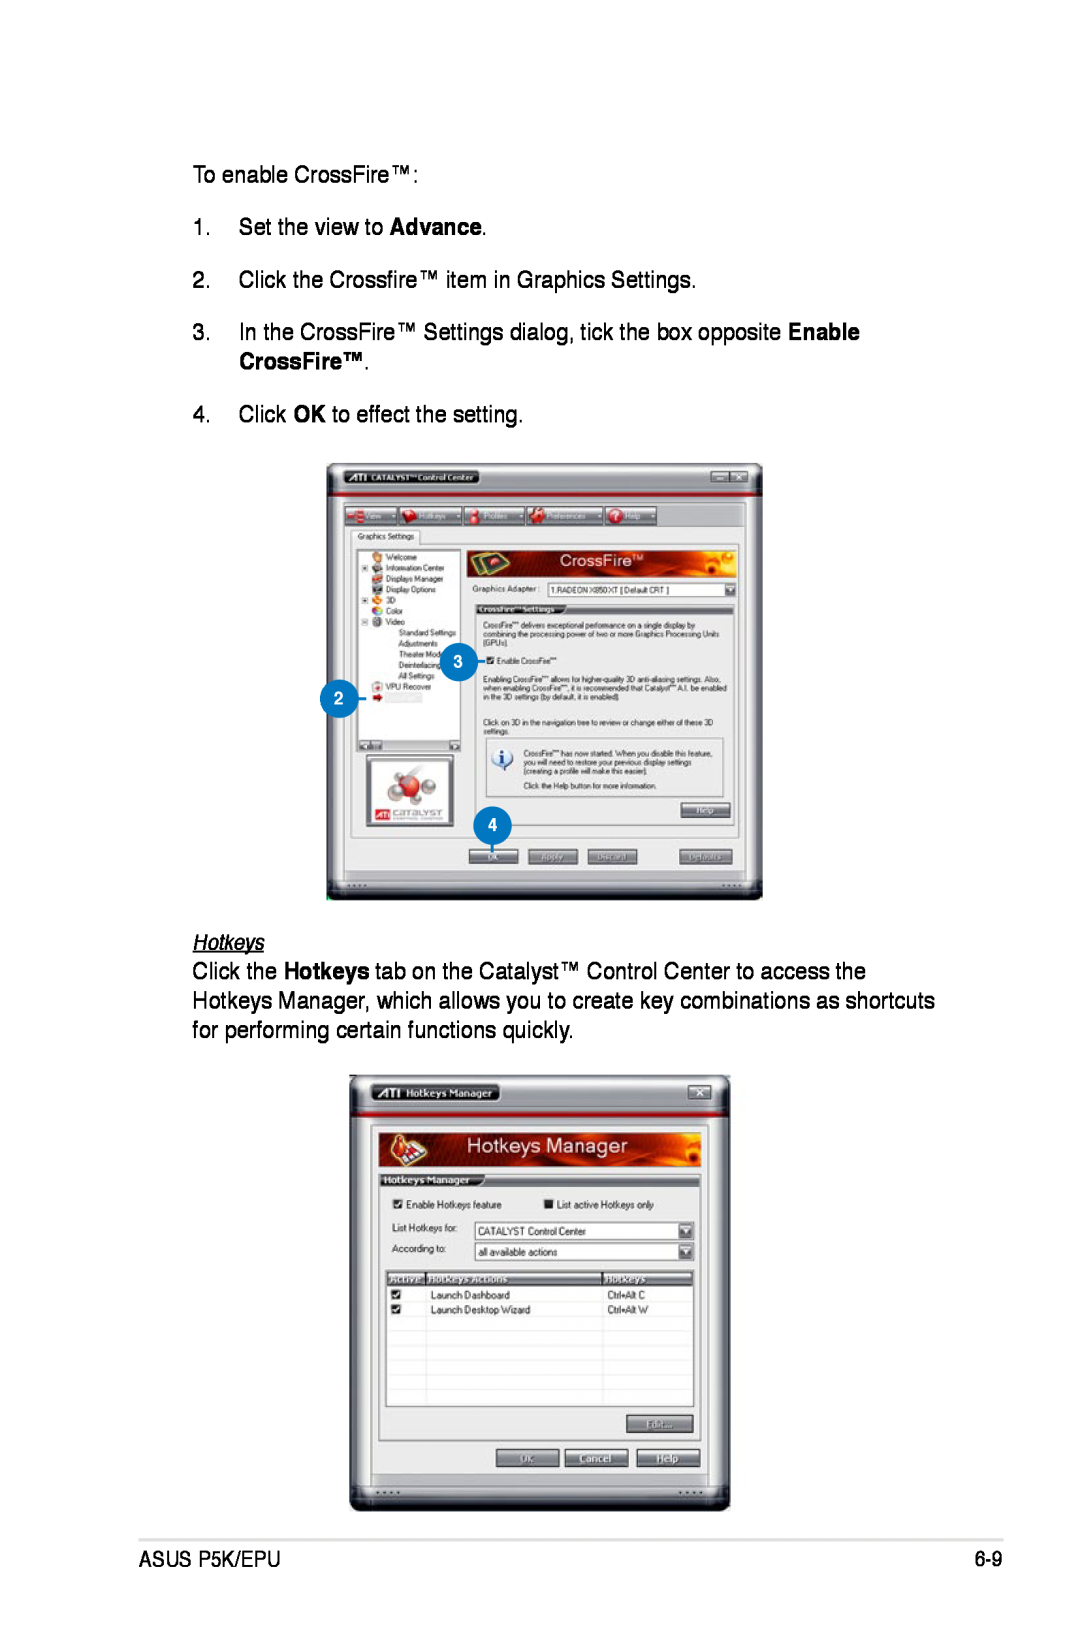 Asus P5K/EPU manual To enable CrossFire 1. Set the view to Advance 